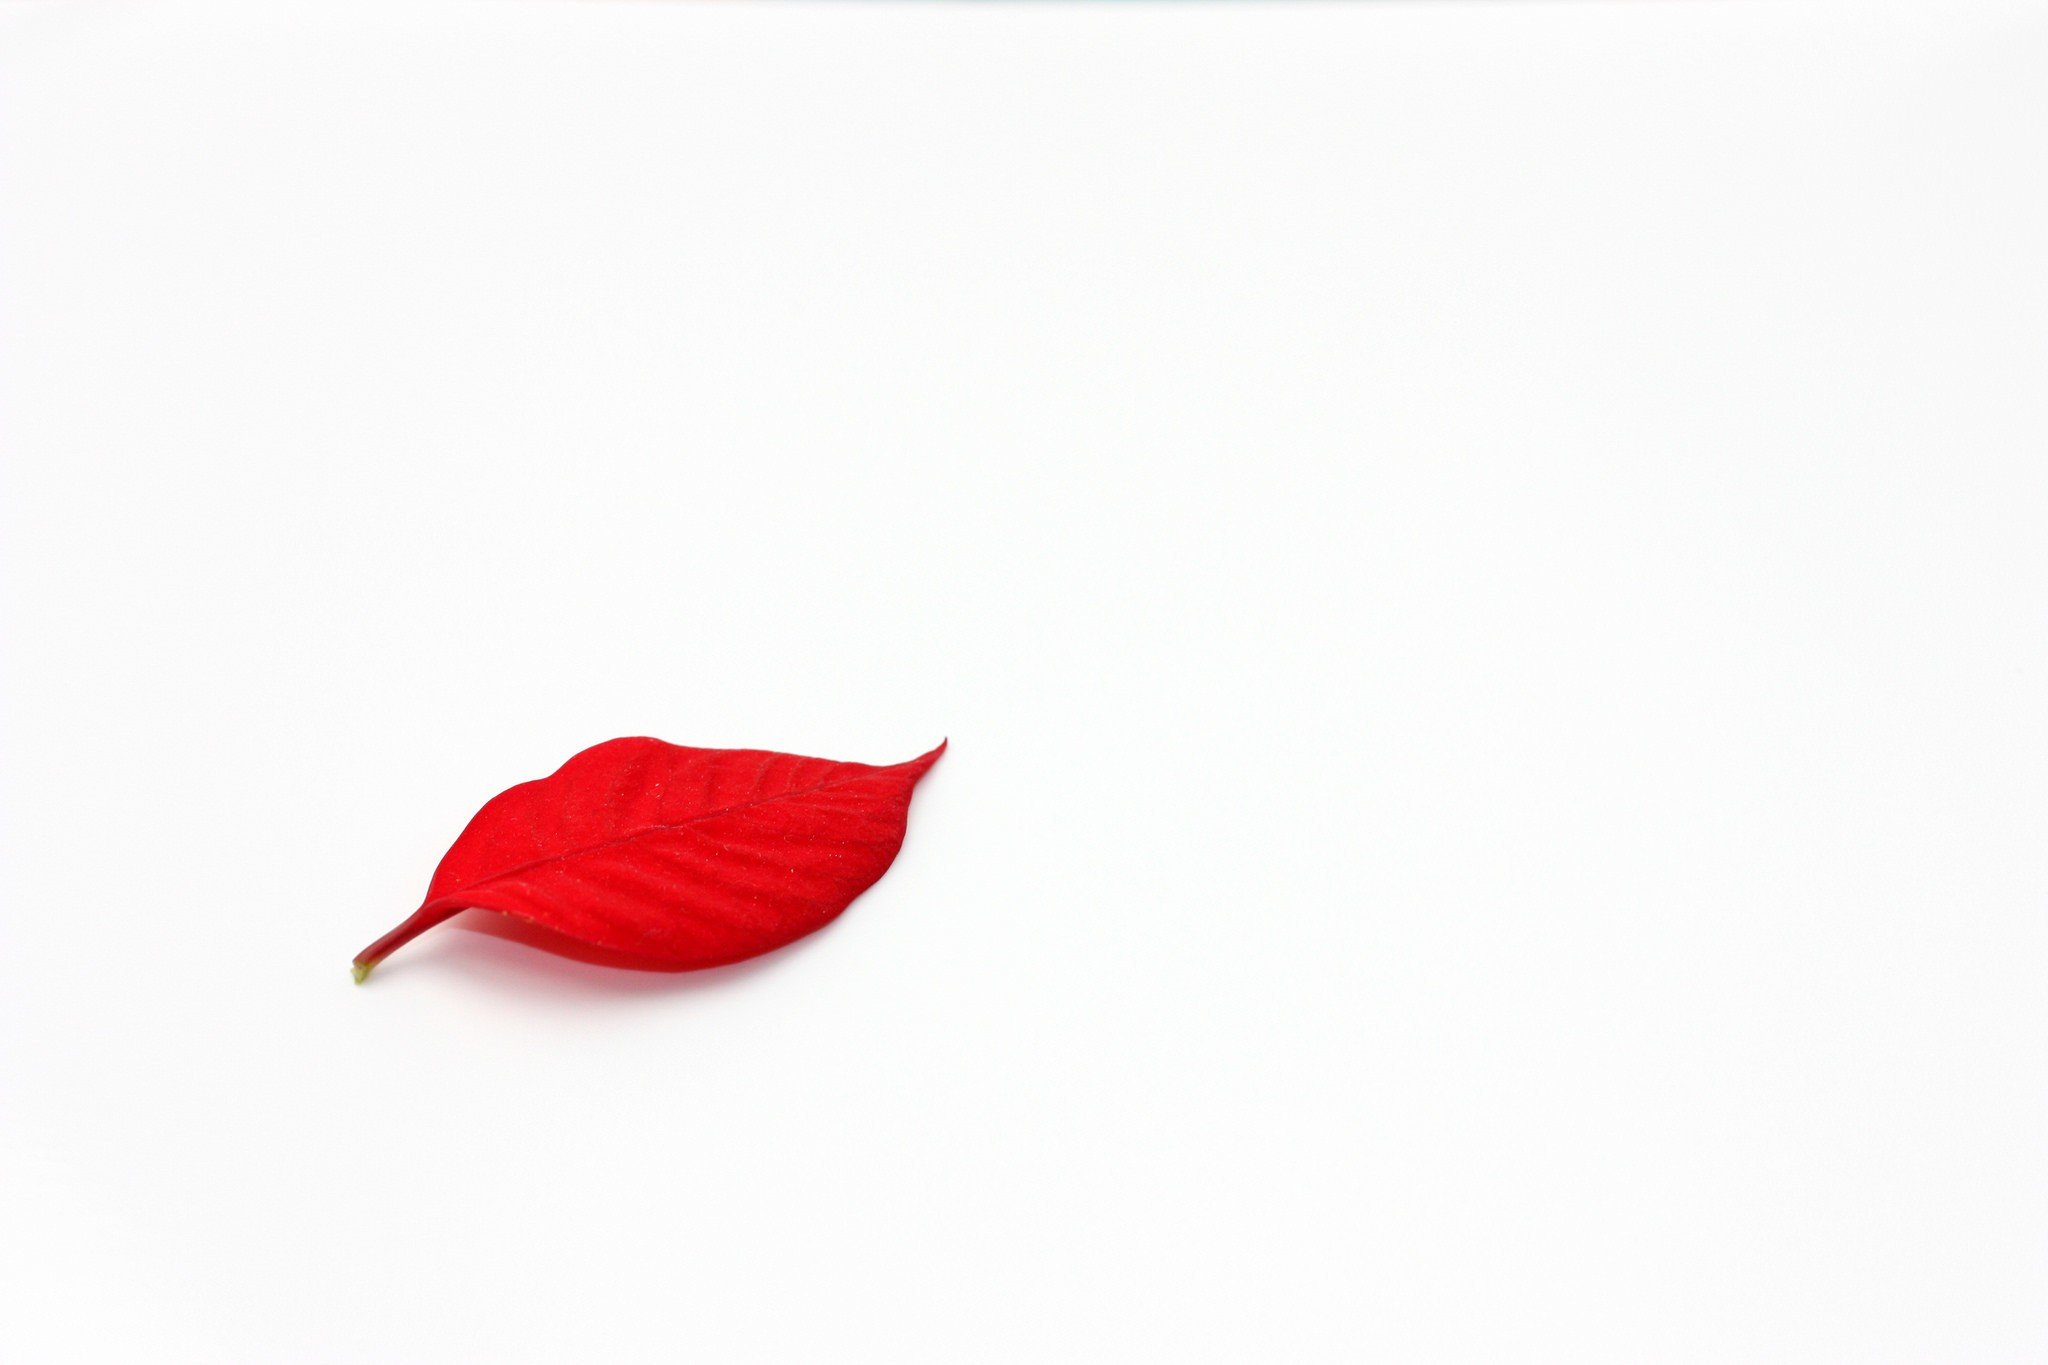 leaves, Red, White, White background, Minimalism, Simple ...